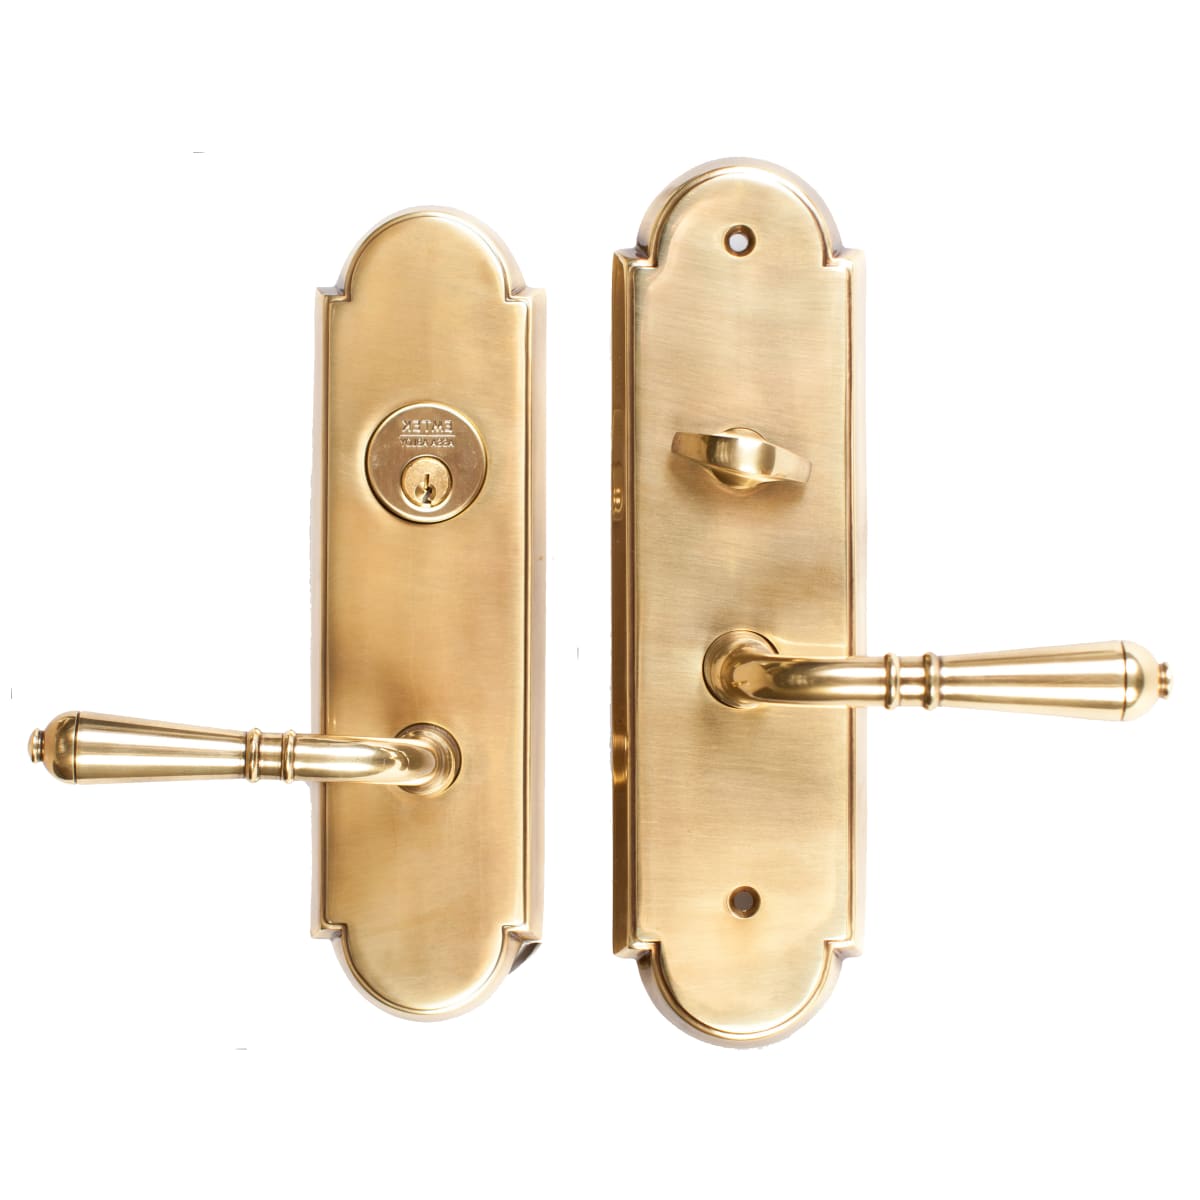 EMTEK Regency Mortise Entry Set with Matching Finish Bristol Knob Choice  of Left/Right Handing Available in Finishes F20330750BLLHUS10B Lef 